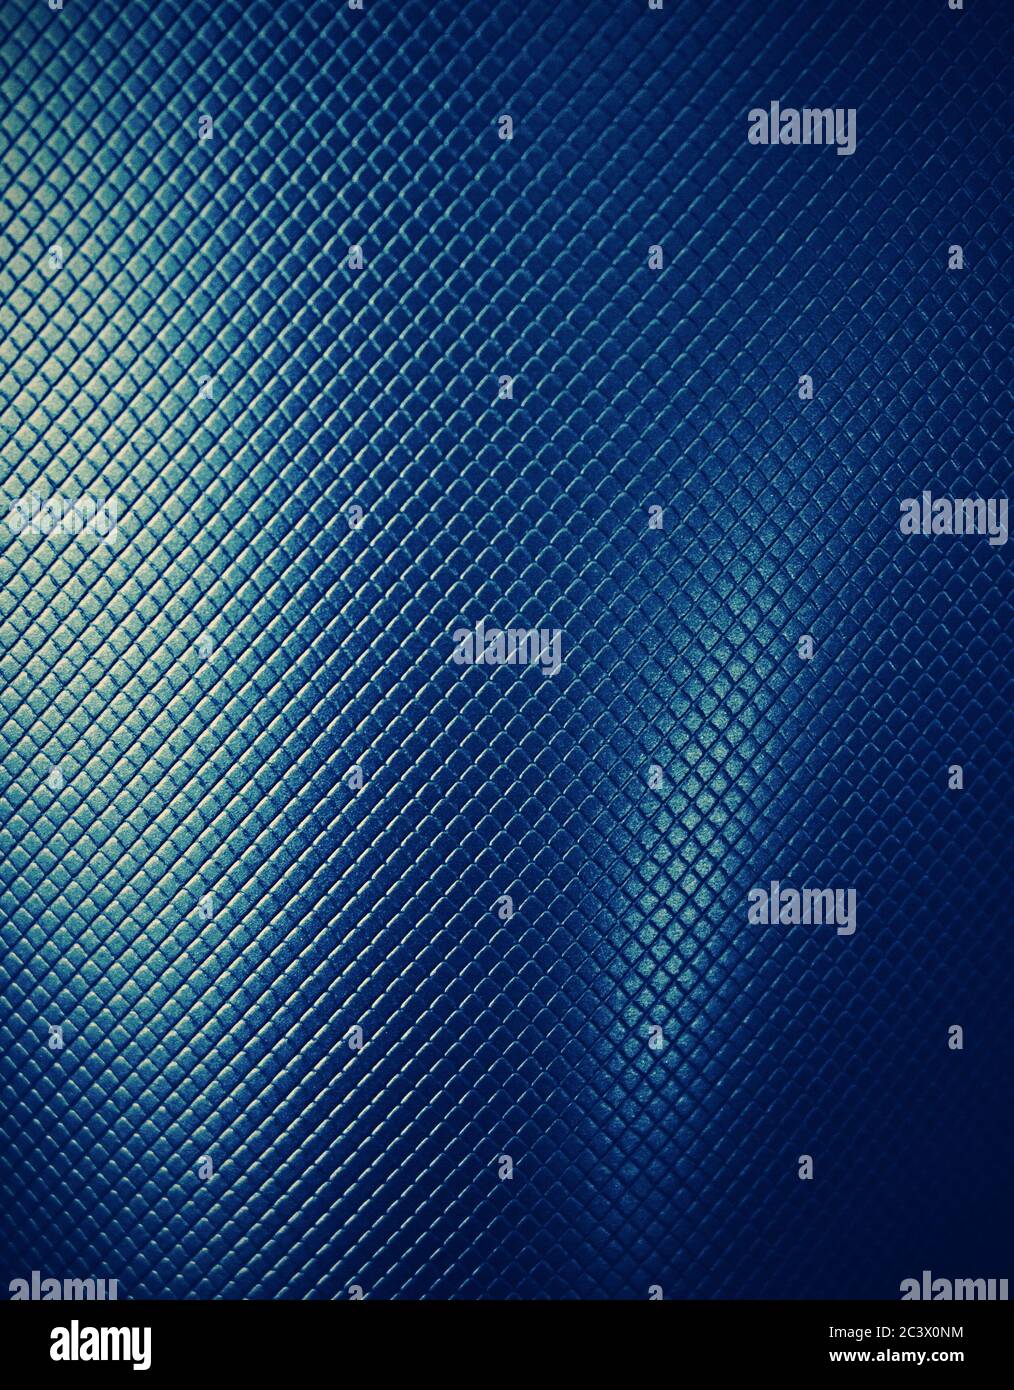 BLUE TEXTURE BACKGROUND FOR GRAPHIC DESIGN Stock Photo - Alamy